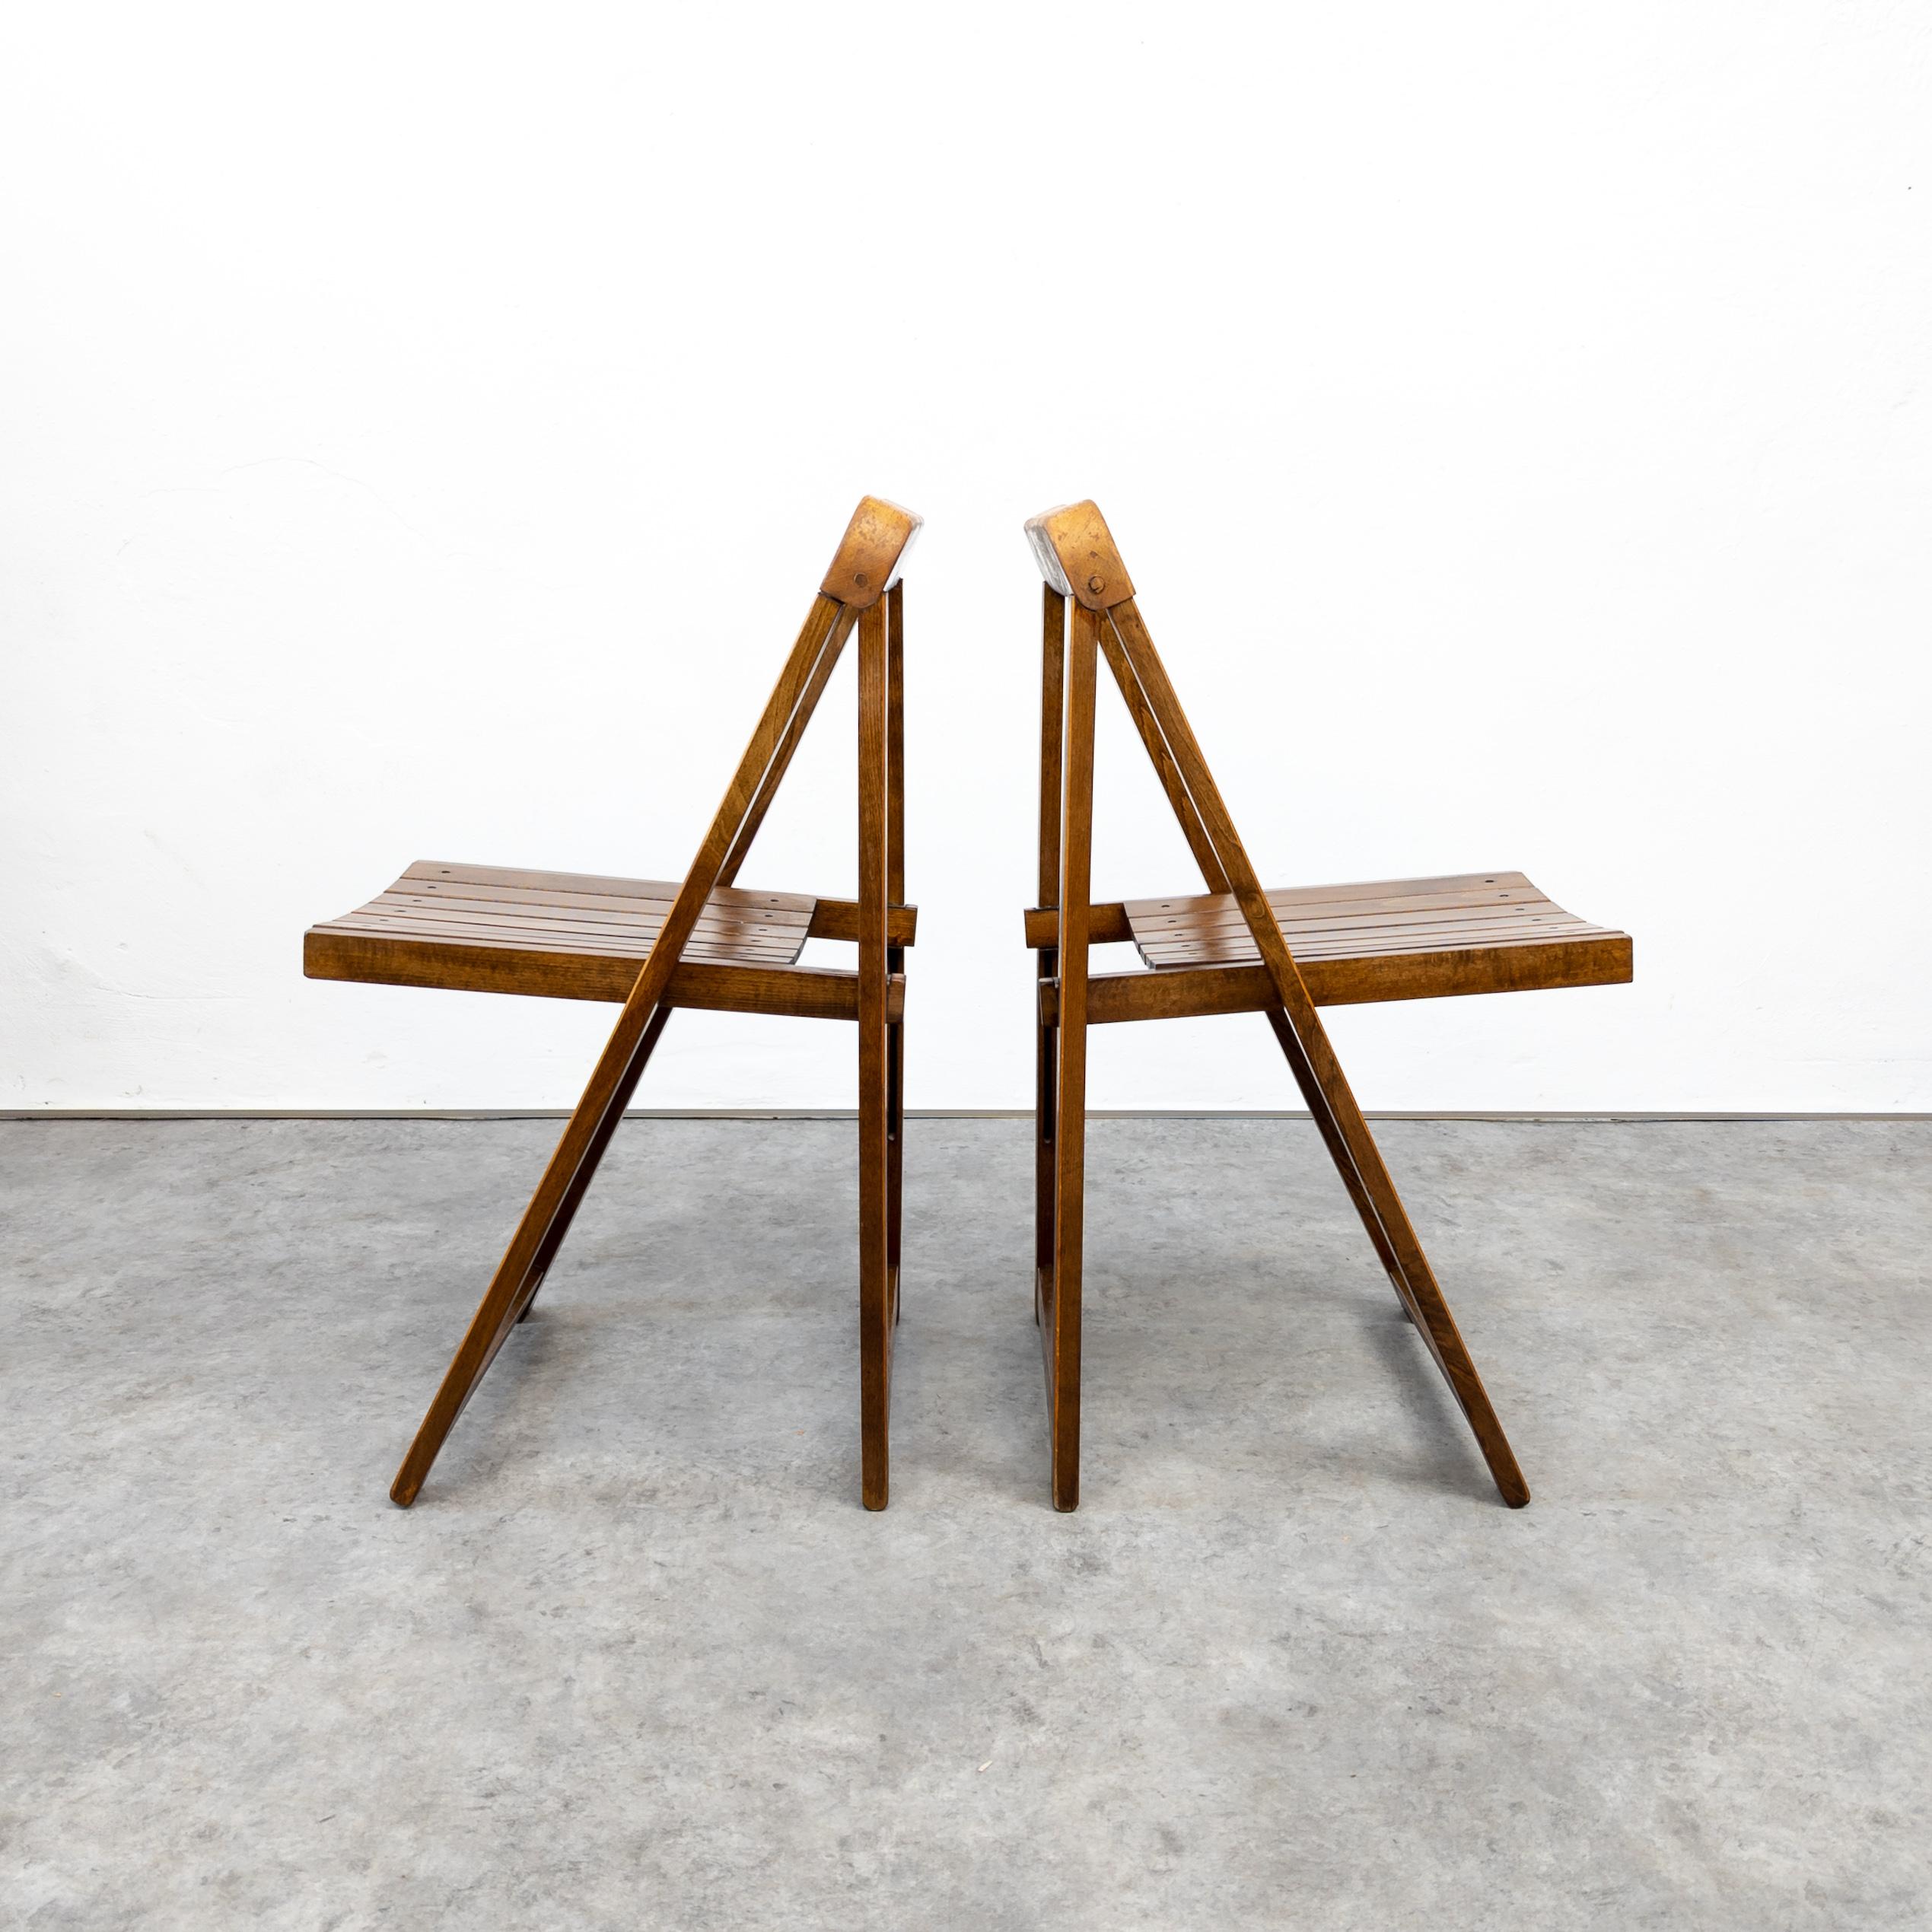 Set of 4 Vintage Folding Chairs by Aldo Jacober for Alberto Bazzani 2